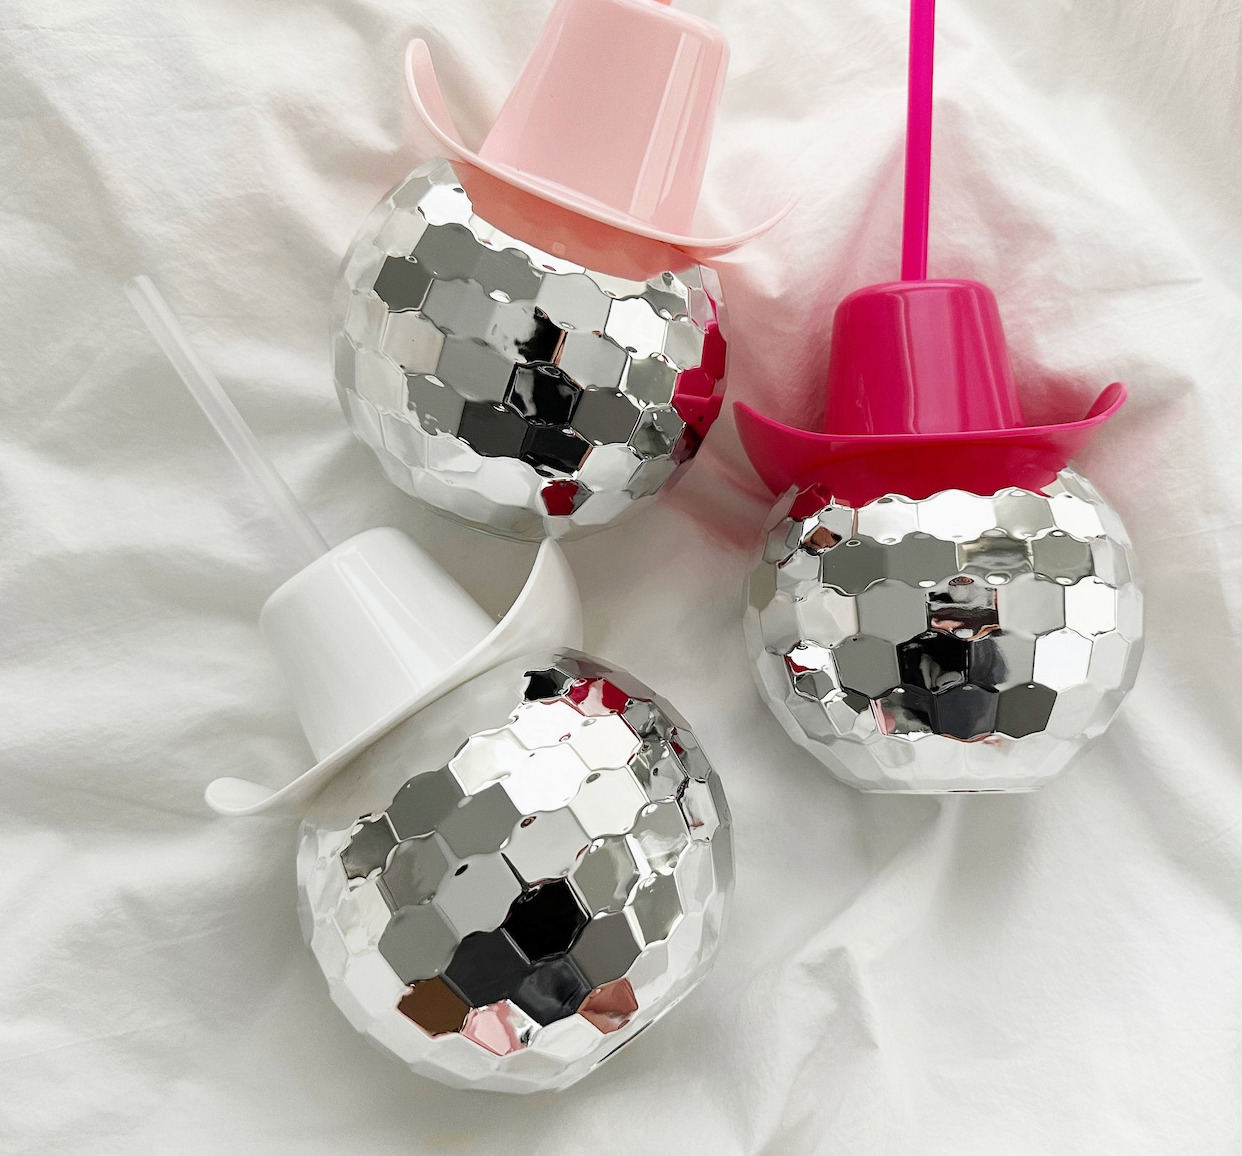 Disco Ball Cups with Cowboy Hat